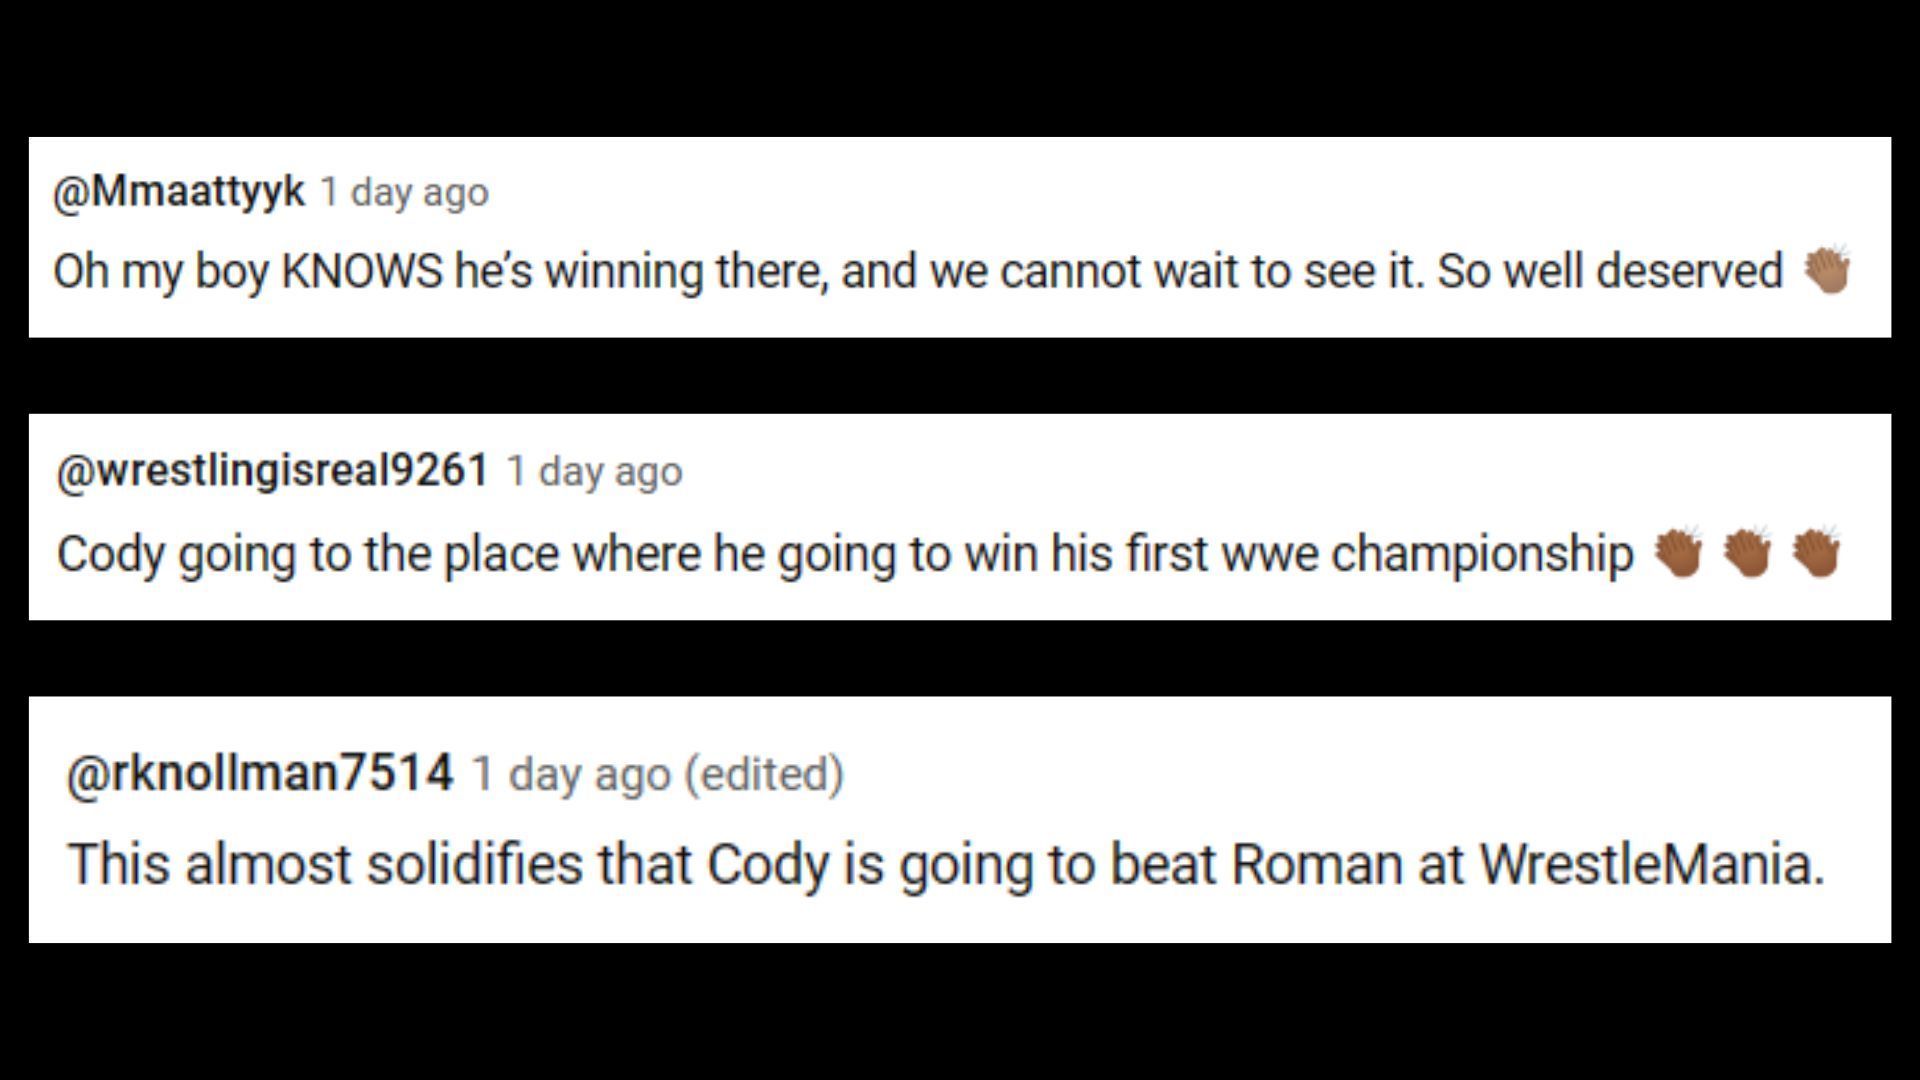 Fans think Cody Rhodes deserves to beat Roman Reigns